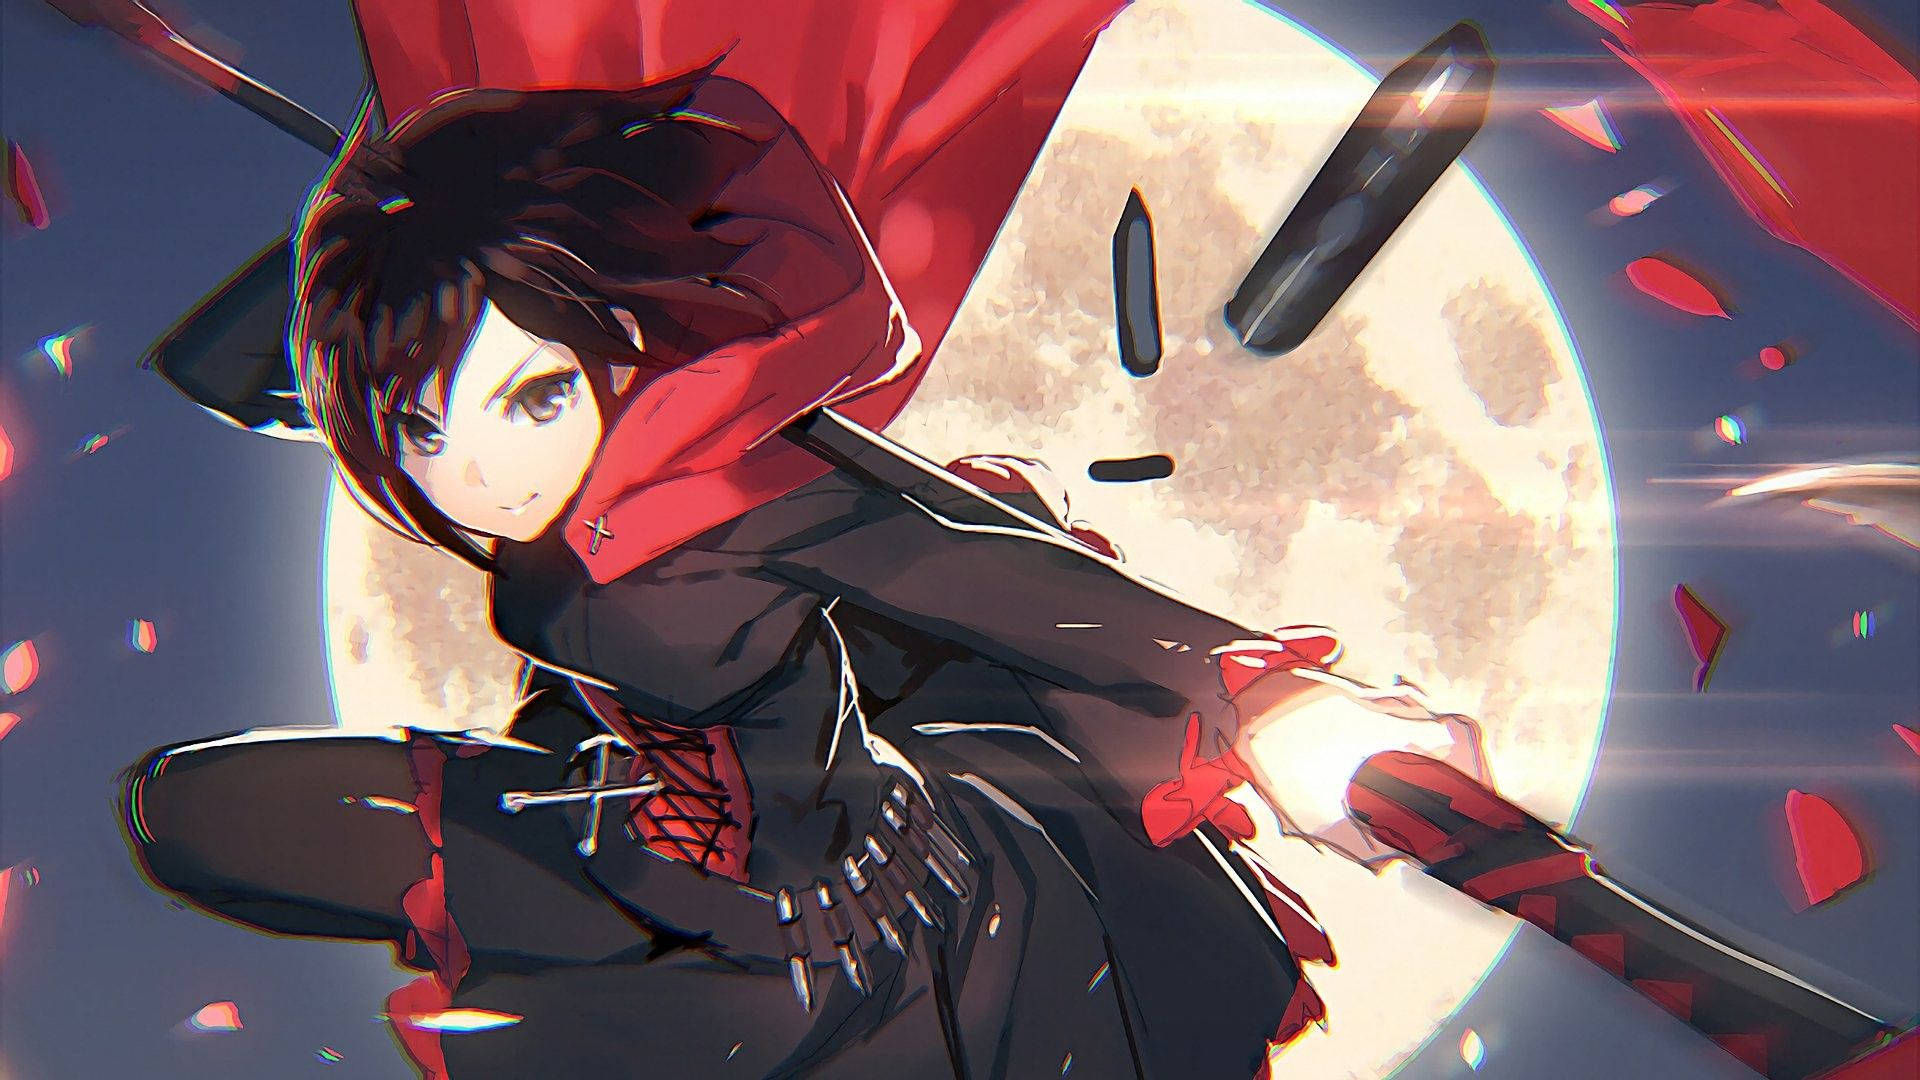 Ruby Rose Mid-Action in the Anime Series Rwby Wallpaper